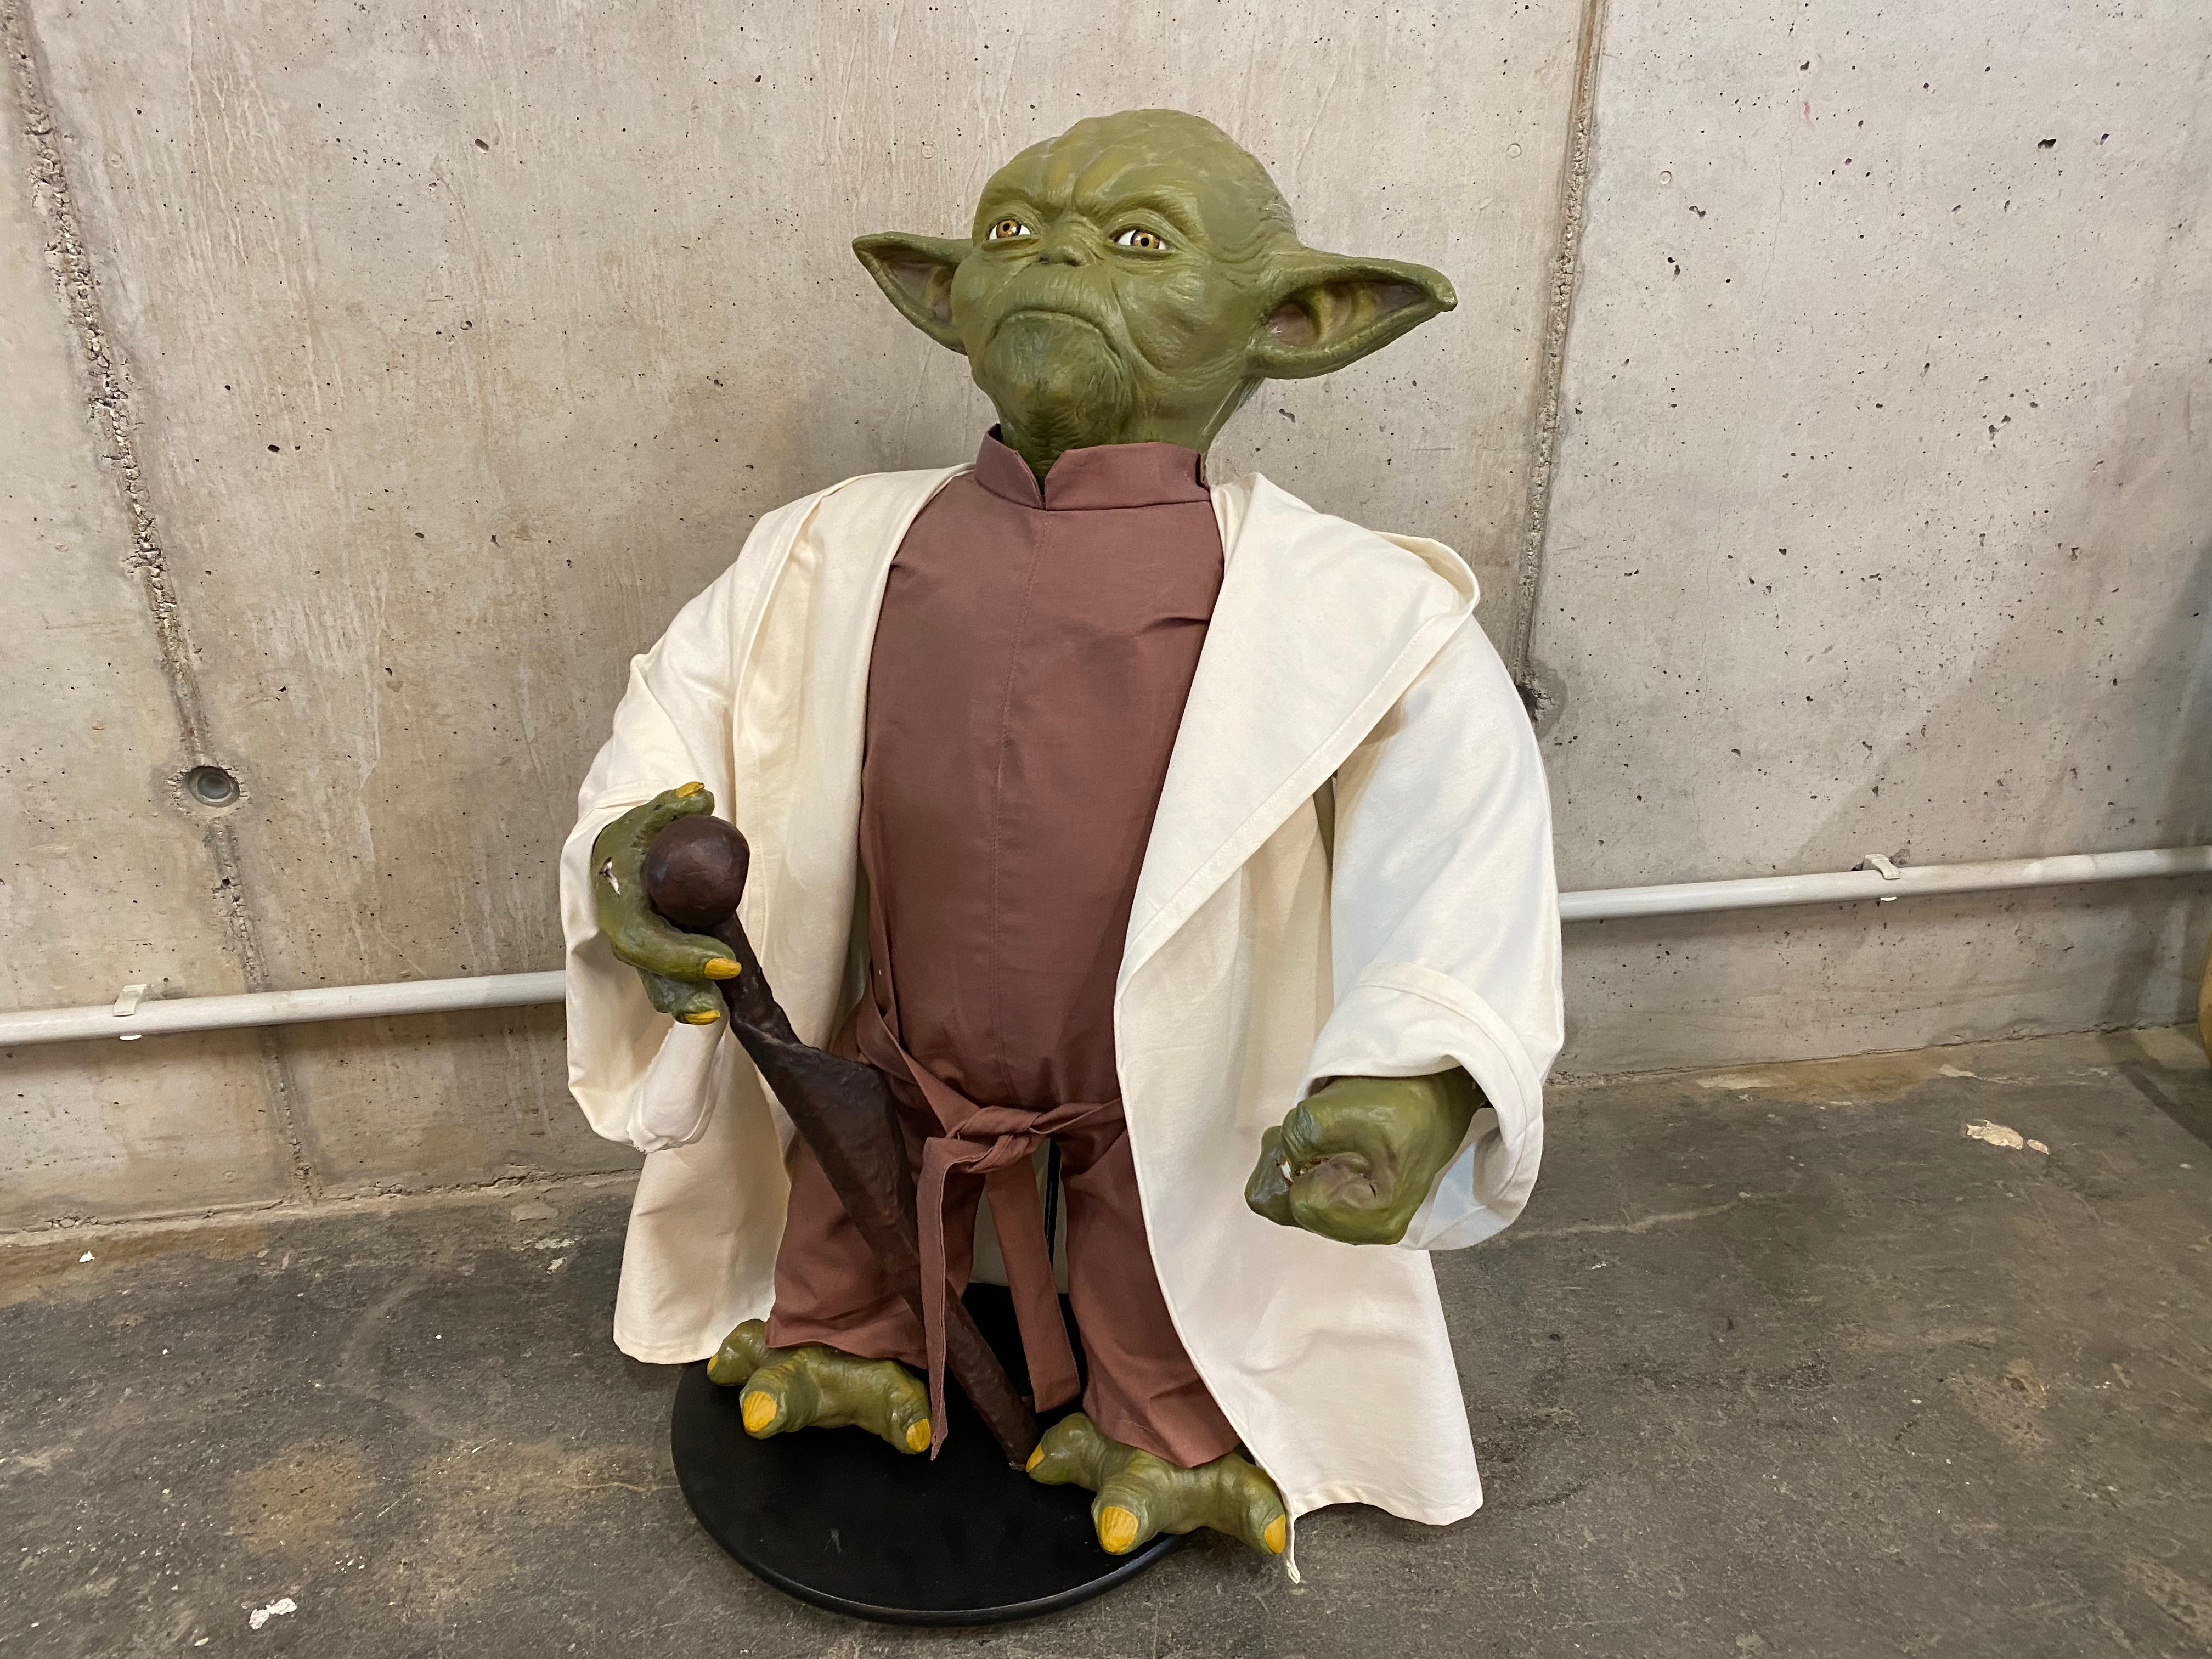 Late 20th Century Life Size Yoda Figure, Edition of 50, Could Be Star Wars Photo Requisite For Sale